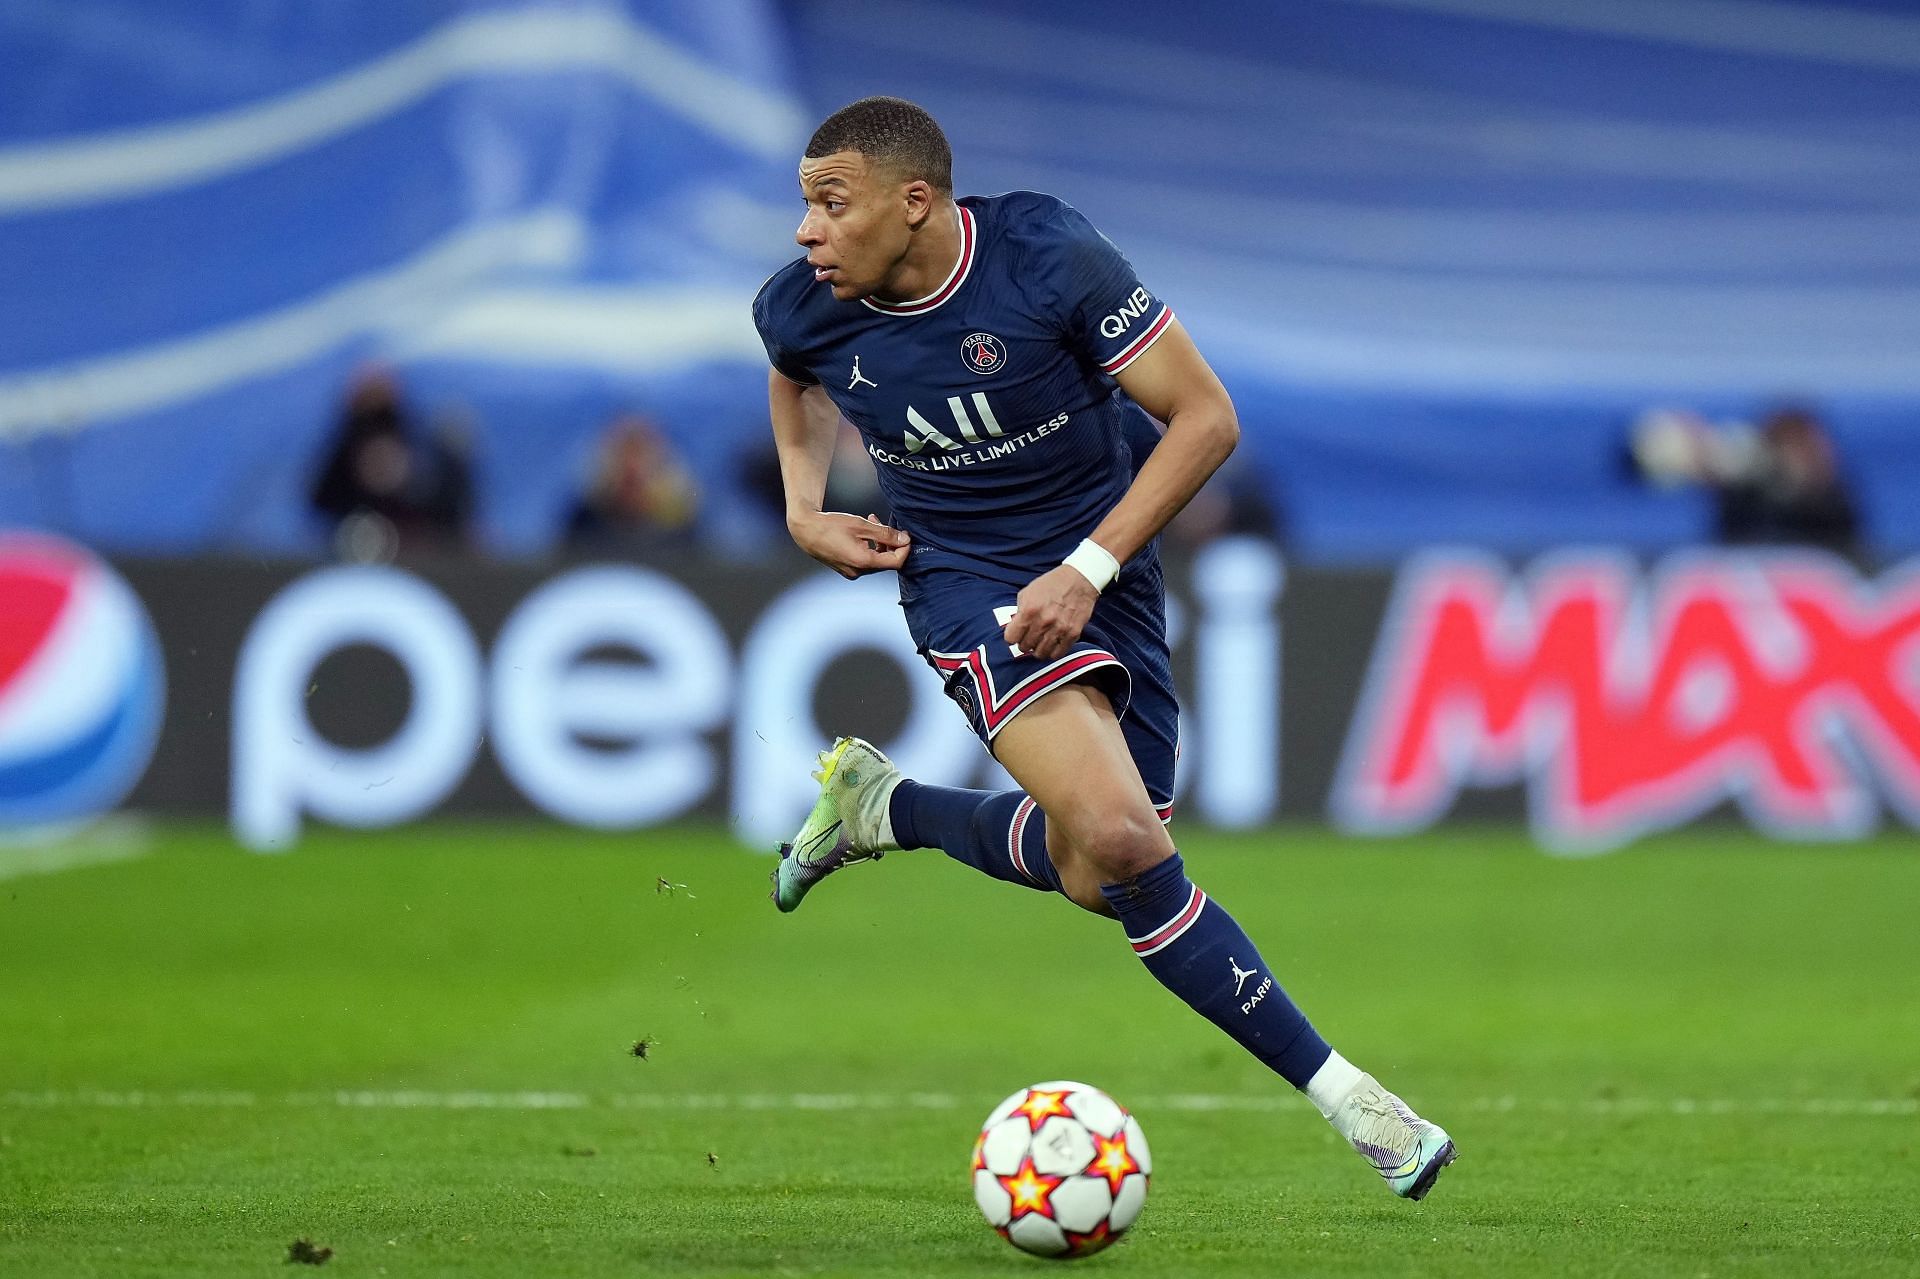 Mbappe has delivered on his promise